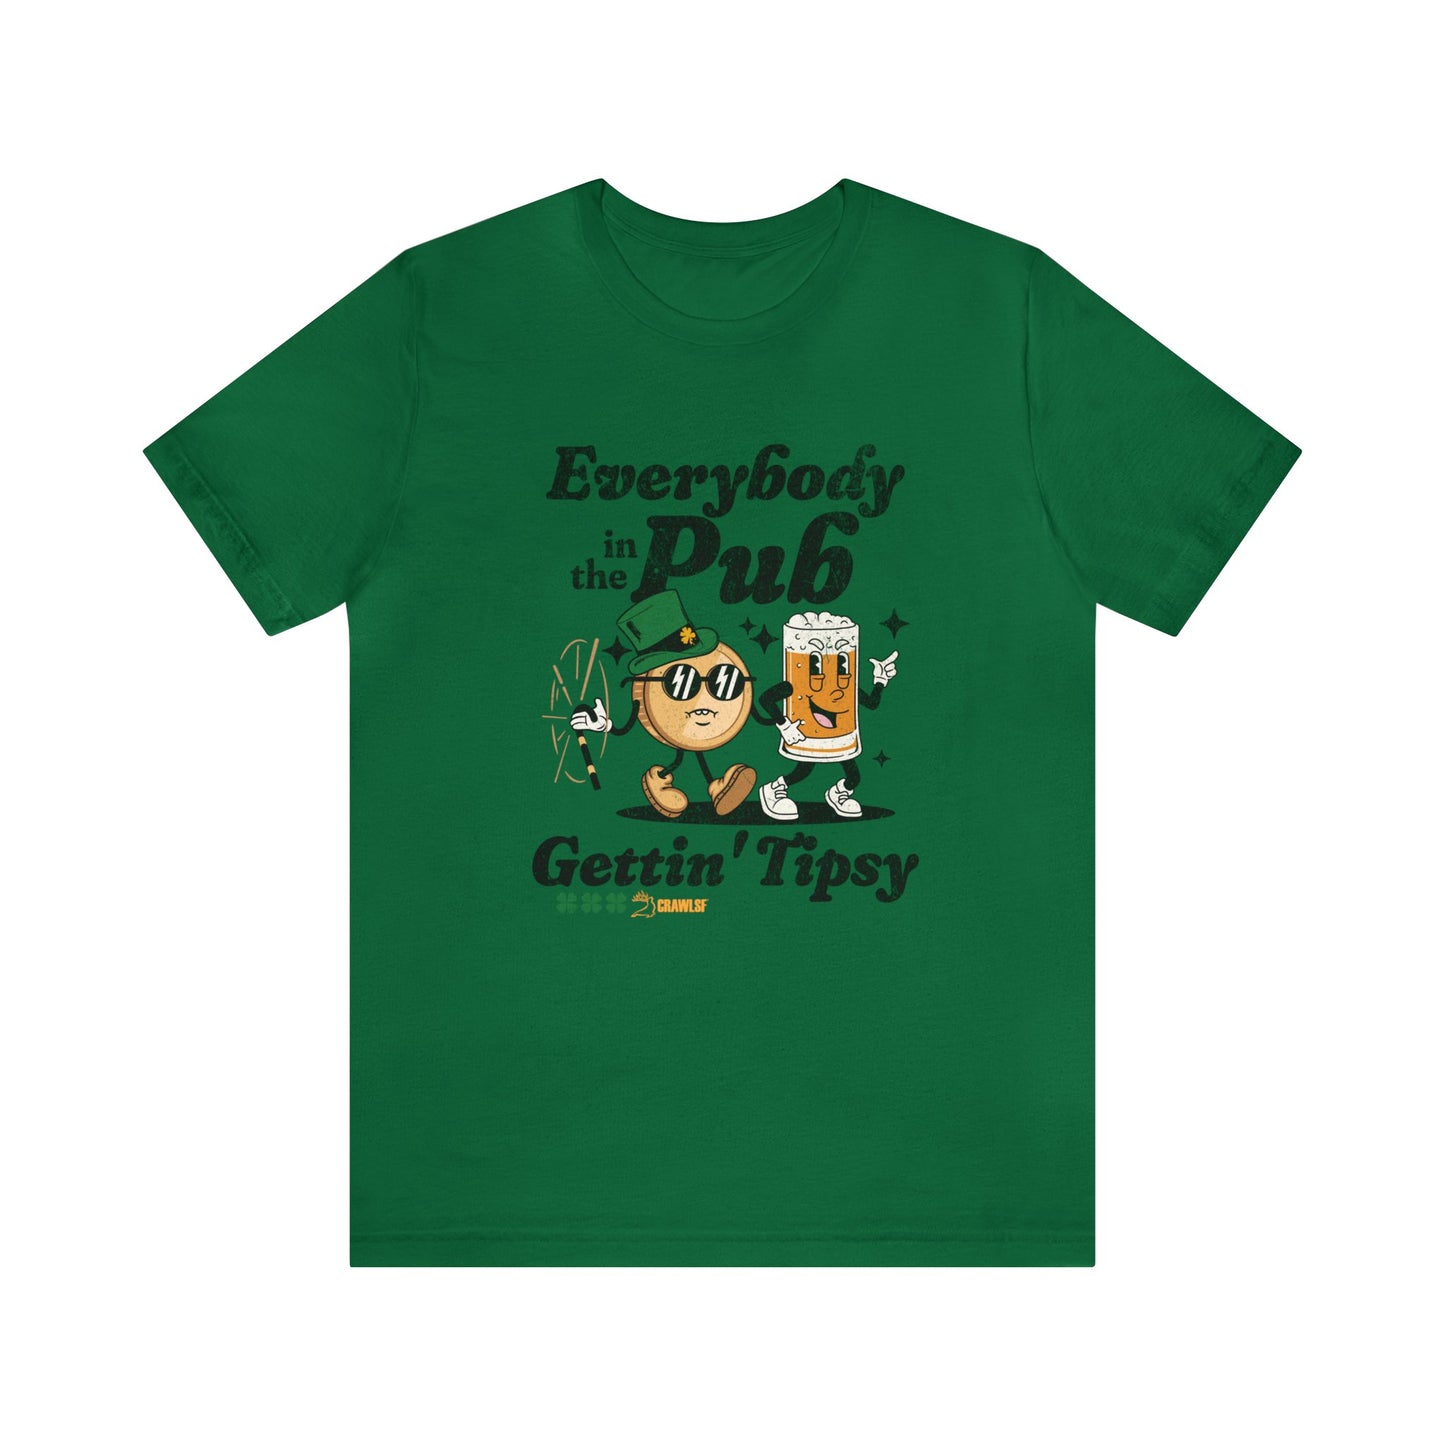 Everybody in the Pub Gettin' Tipsy Men's Tee